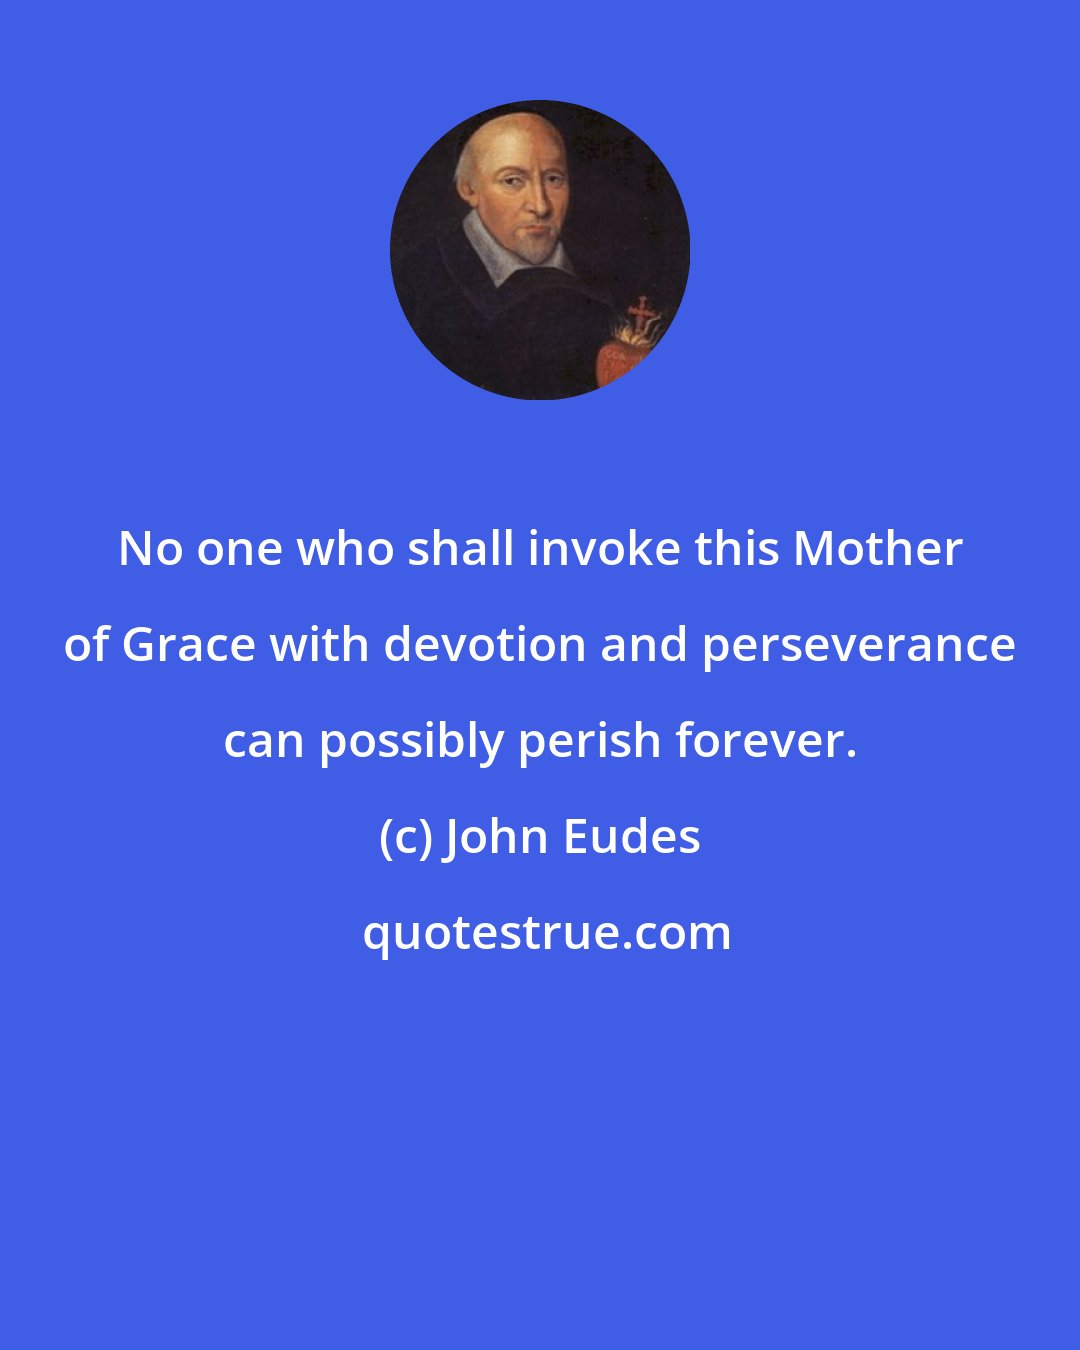 John Eudes: No one who shall invoke this Mother of Grace with devotion and perseverance can possibly perish forever.